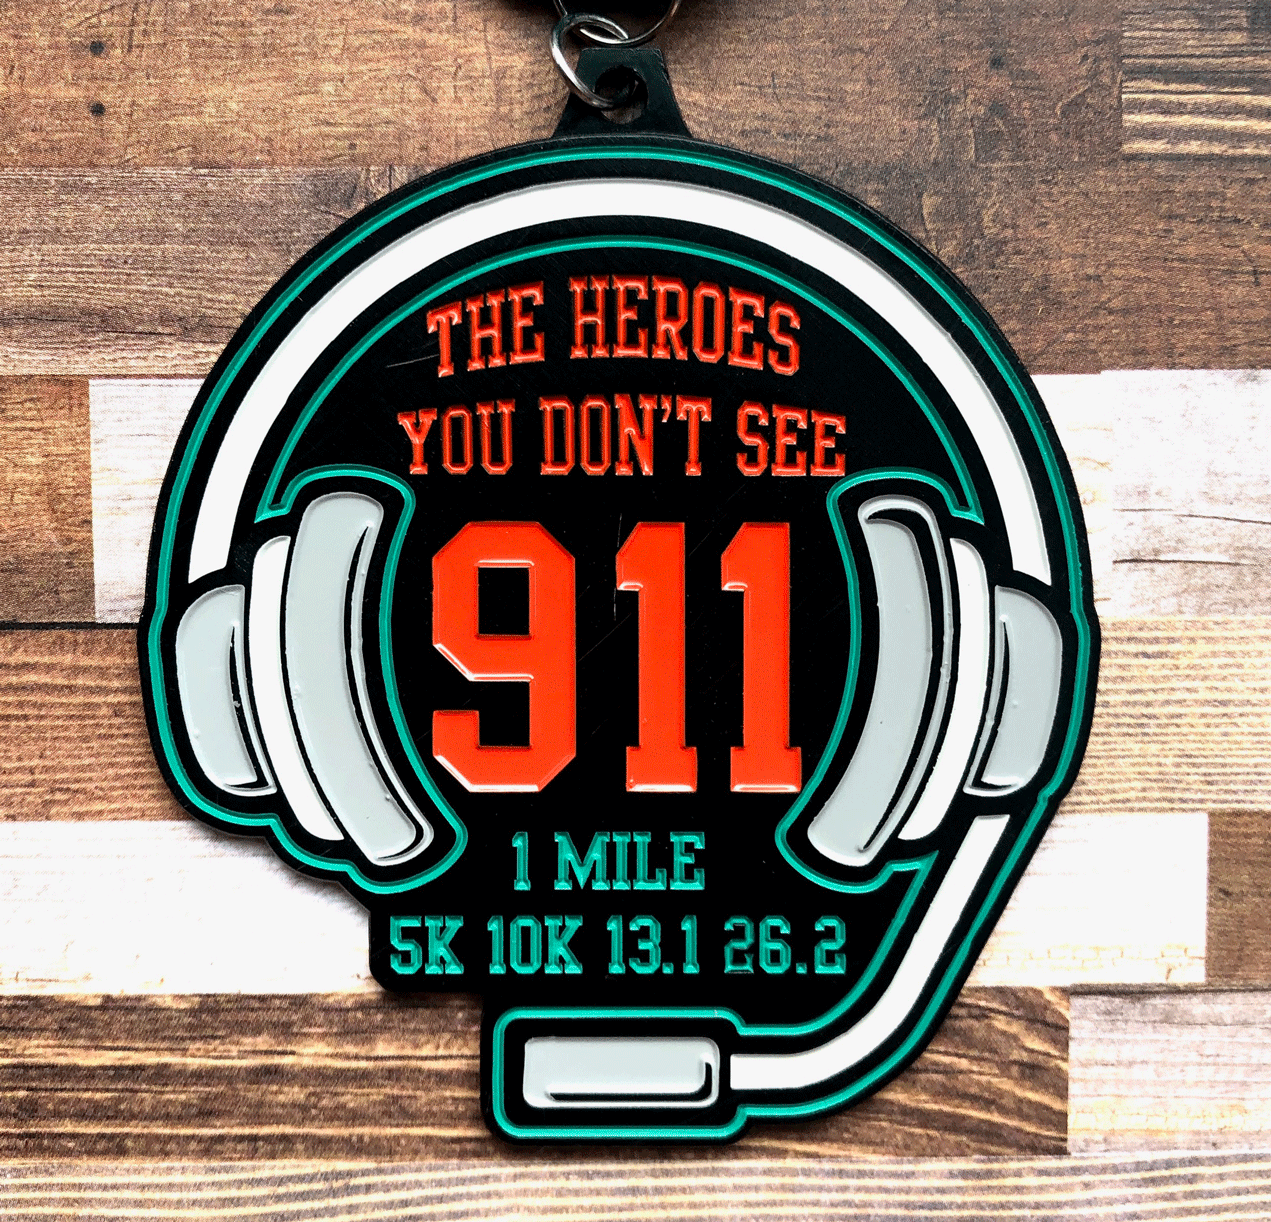 Only $9! The Heroes You Don't See 1 M 5K 10K 13.1 26.2 -Tucson